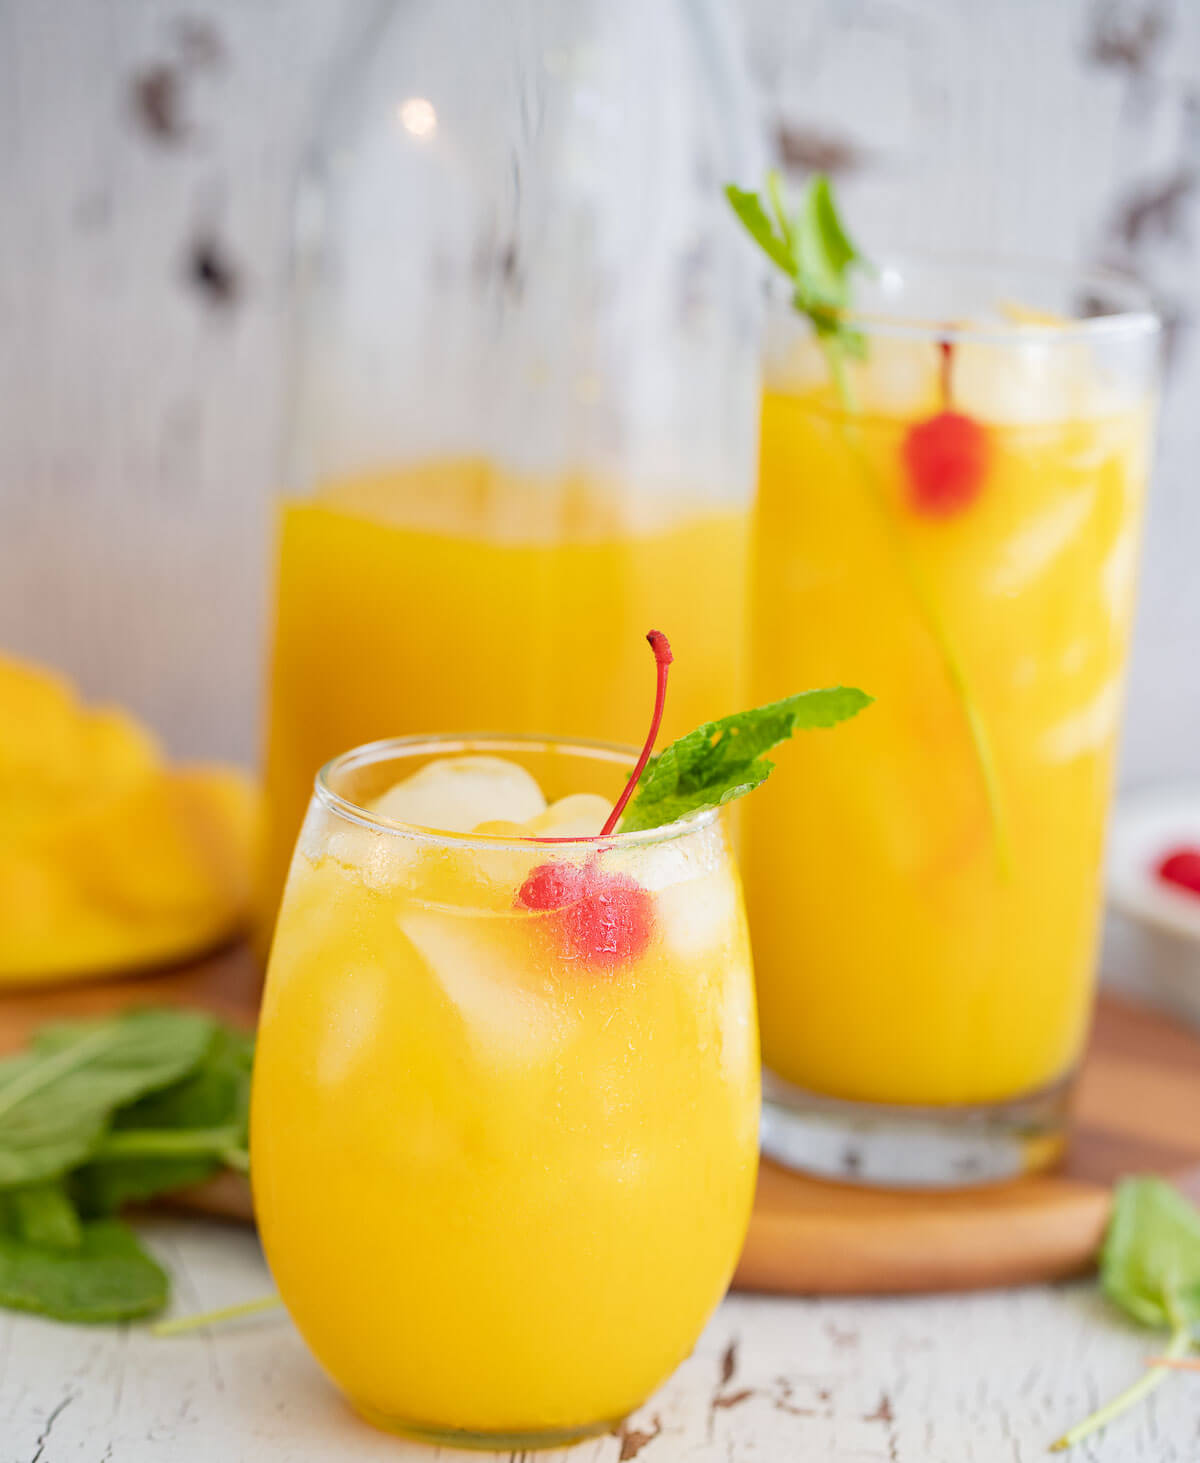 Easy fresh mango juice recipe - how to make it at home